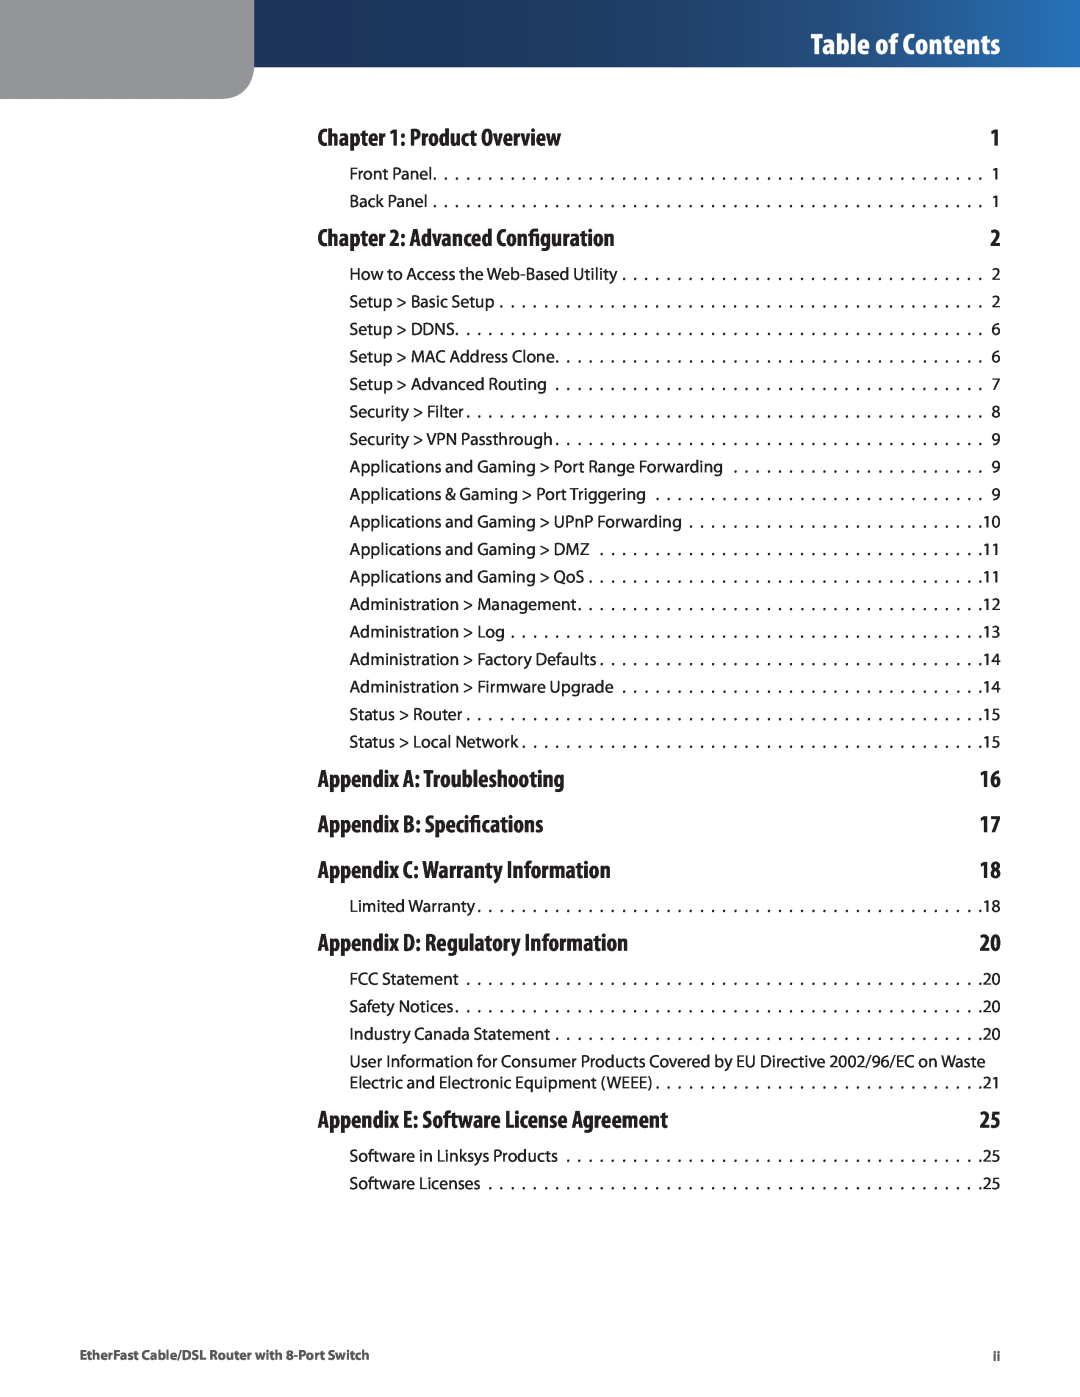 Cisco Systems BEFSR81 manual Table of Contents, Product Overview, Advanced Configuration, Appendix A Troubleshooting 